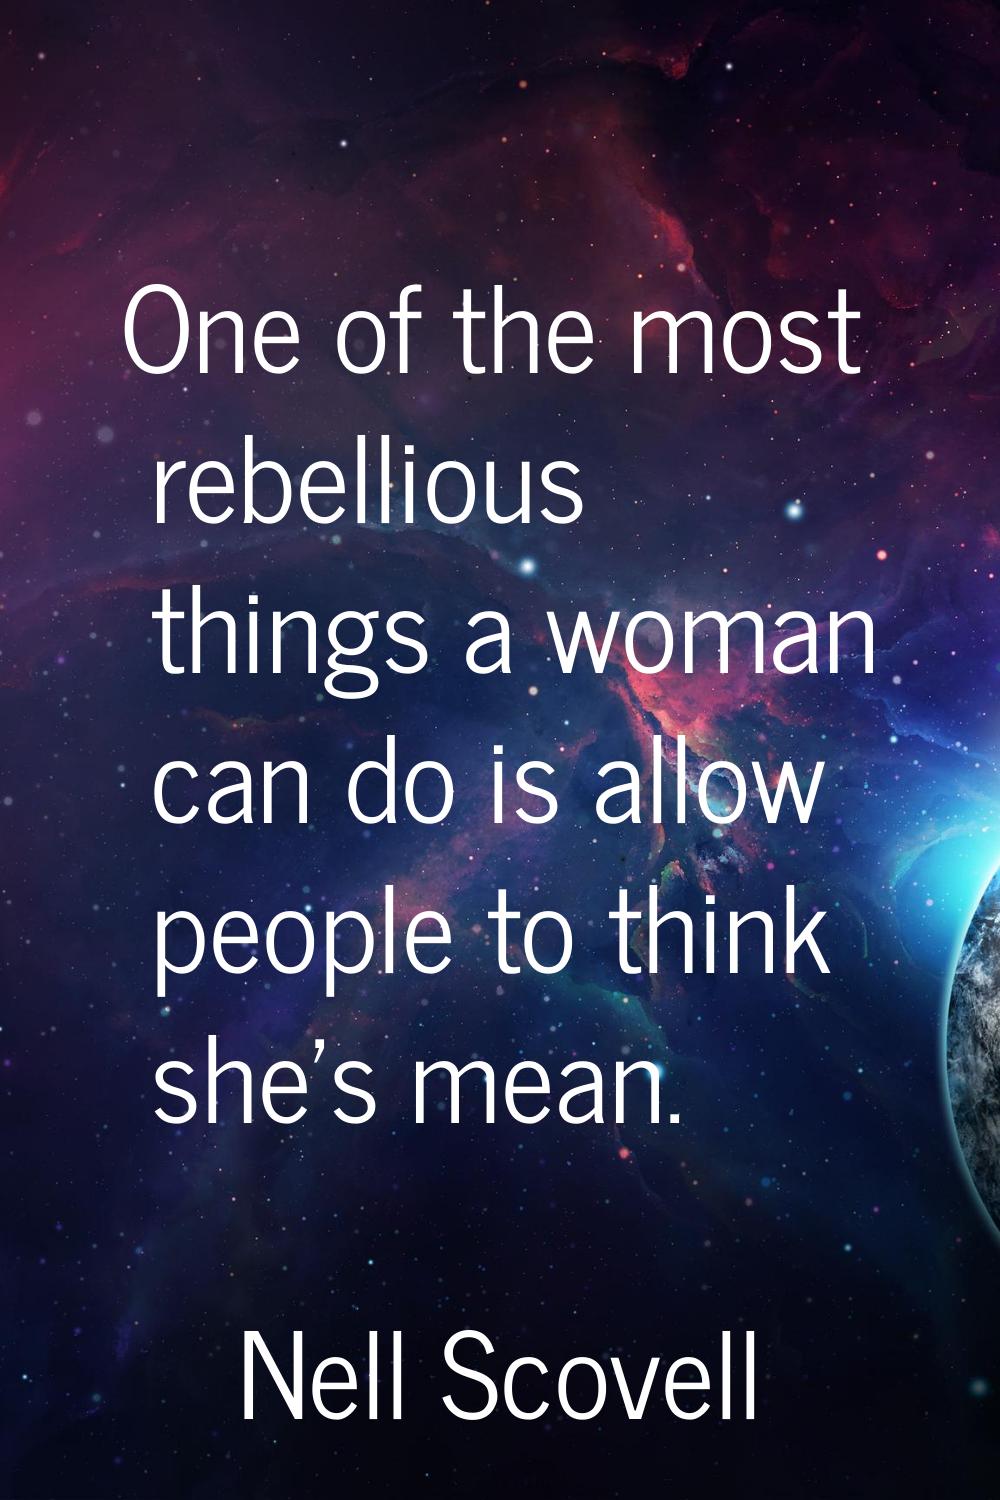 One of the most rebellious things a woman can do is allow people to think she's mean.